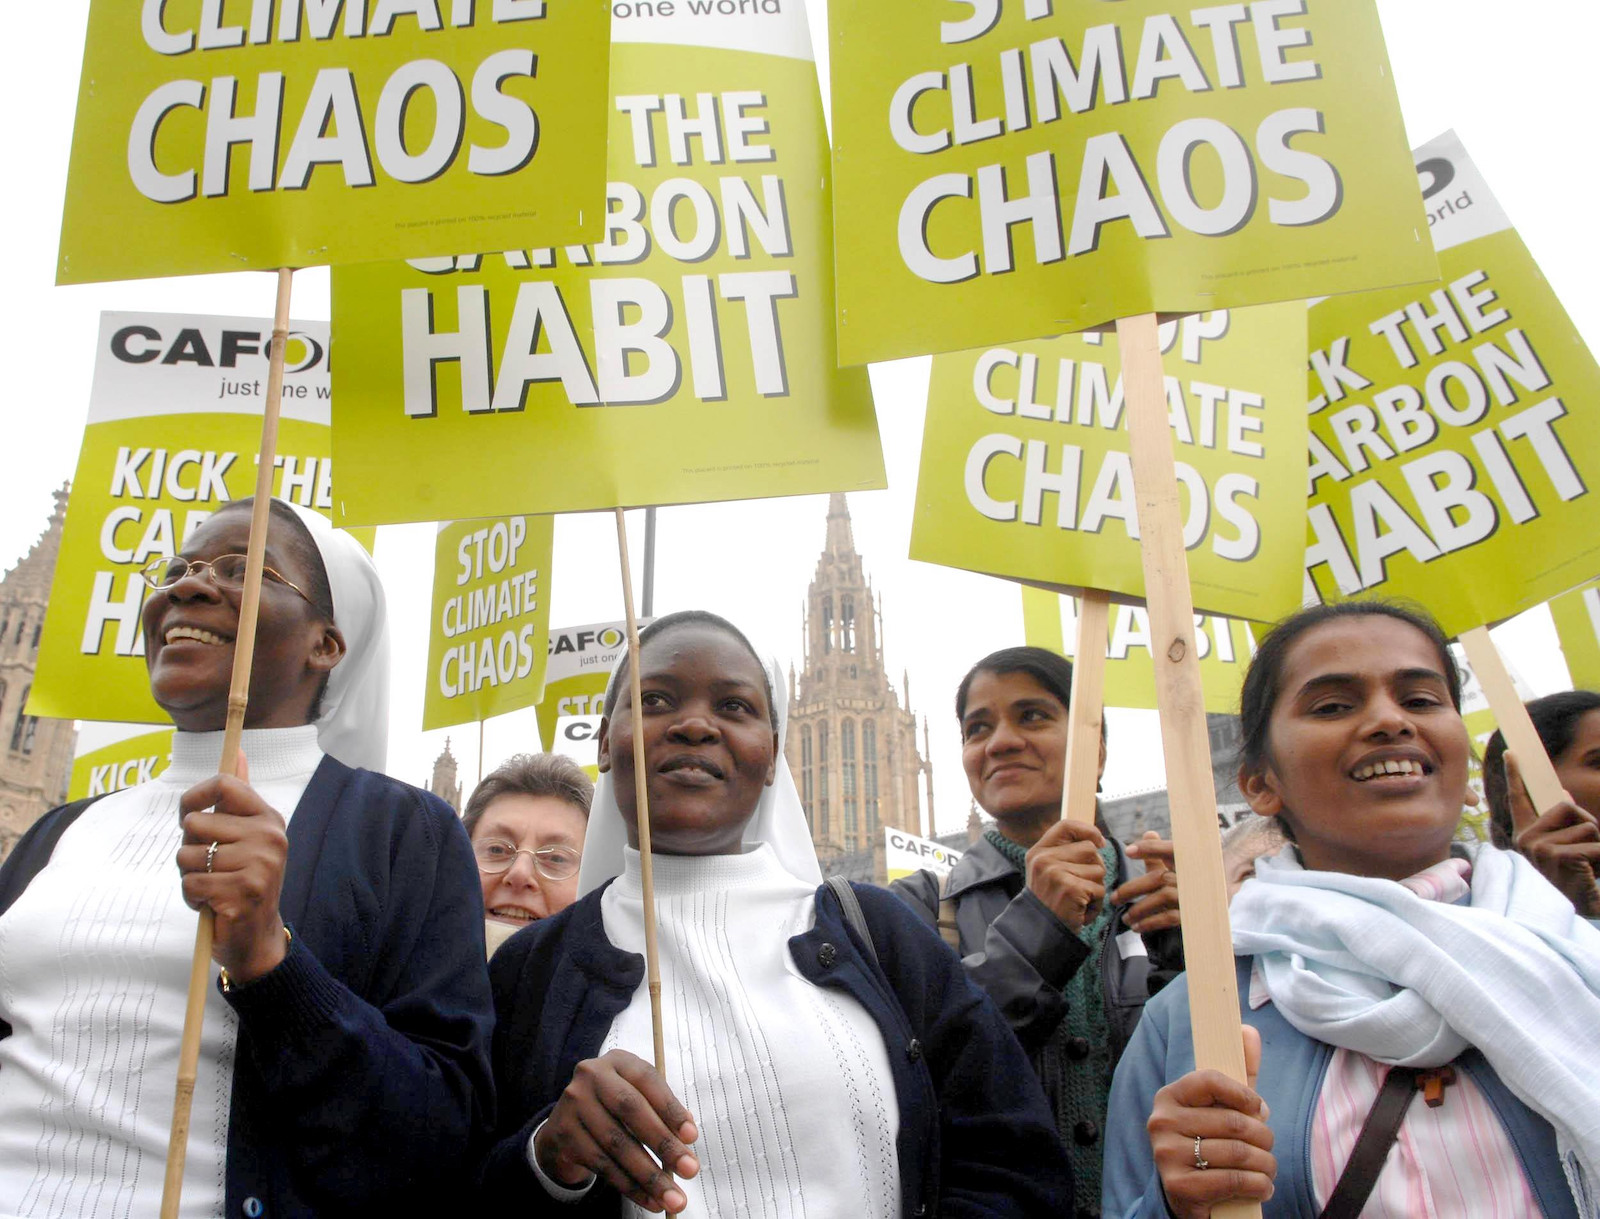 a group of nuns hold protest signs in support of climate action